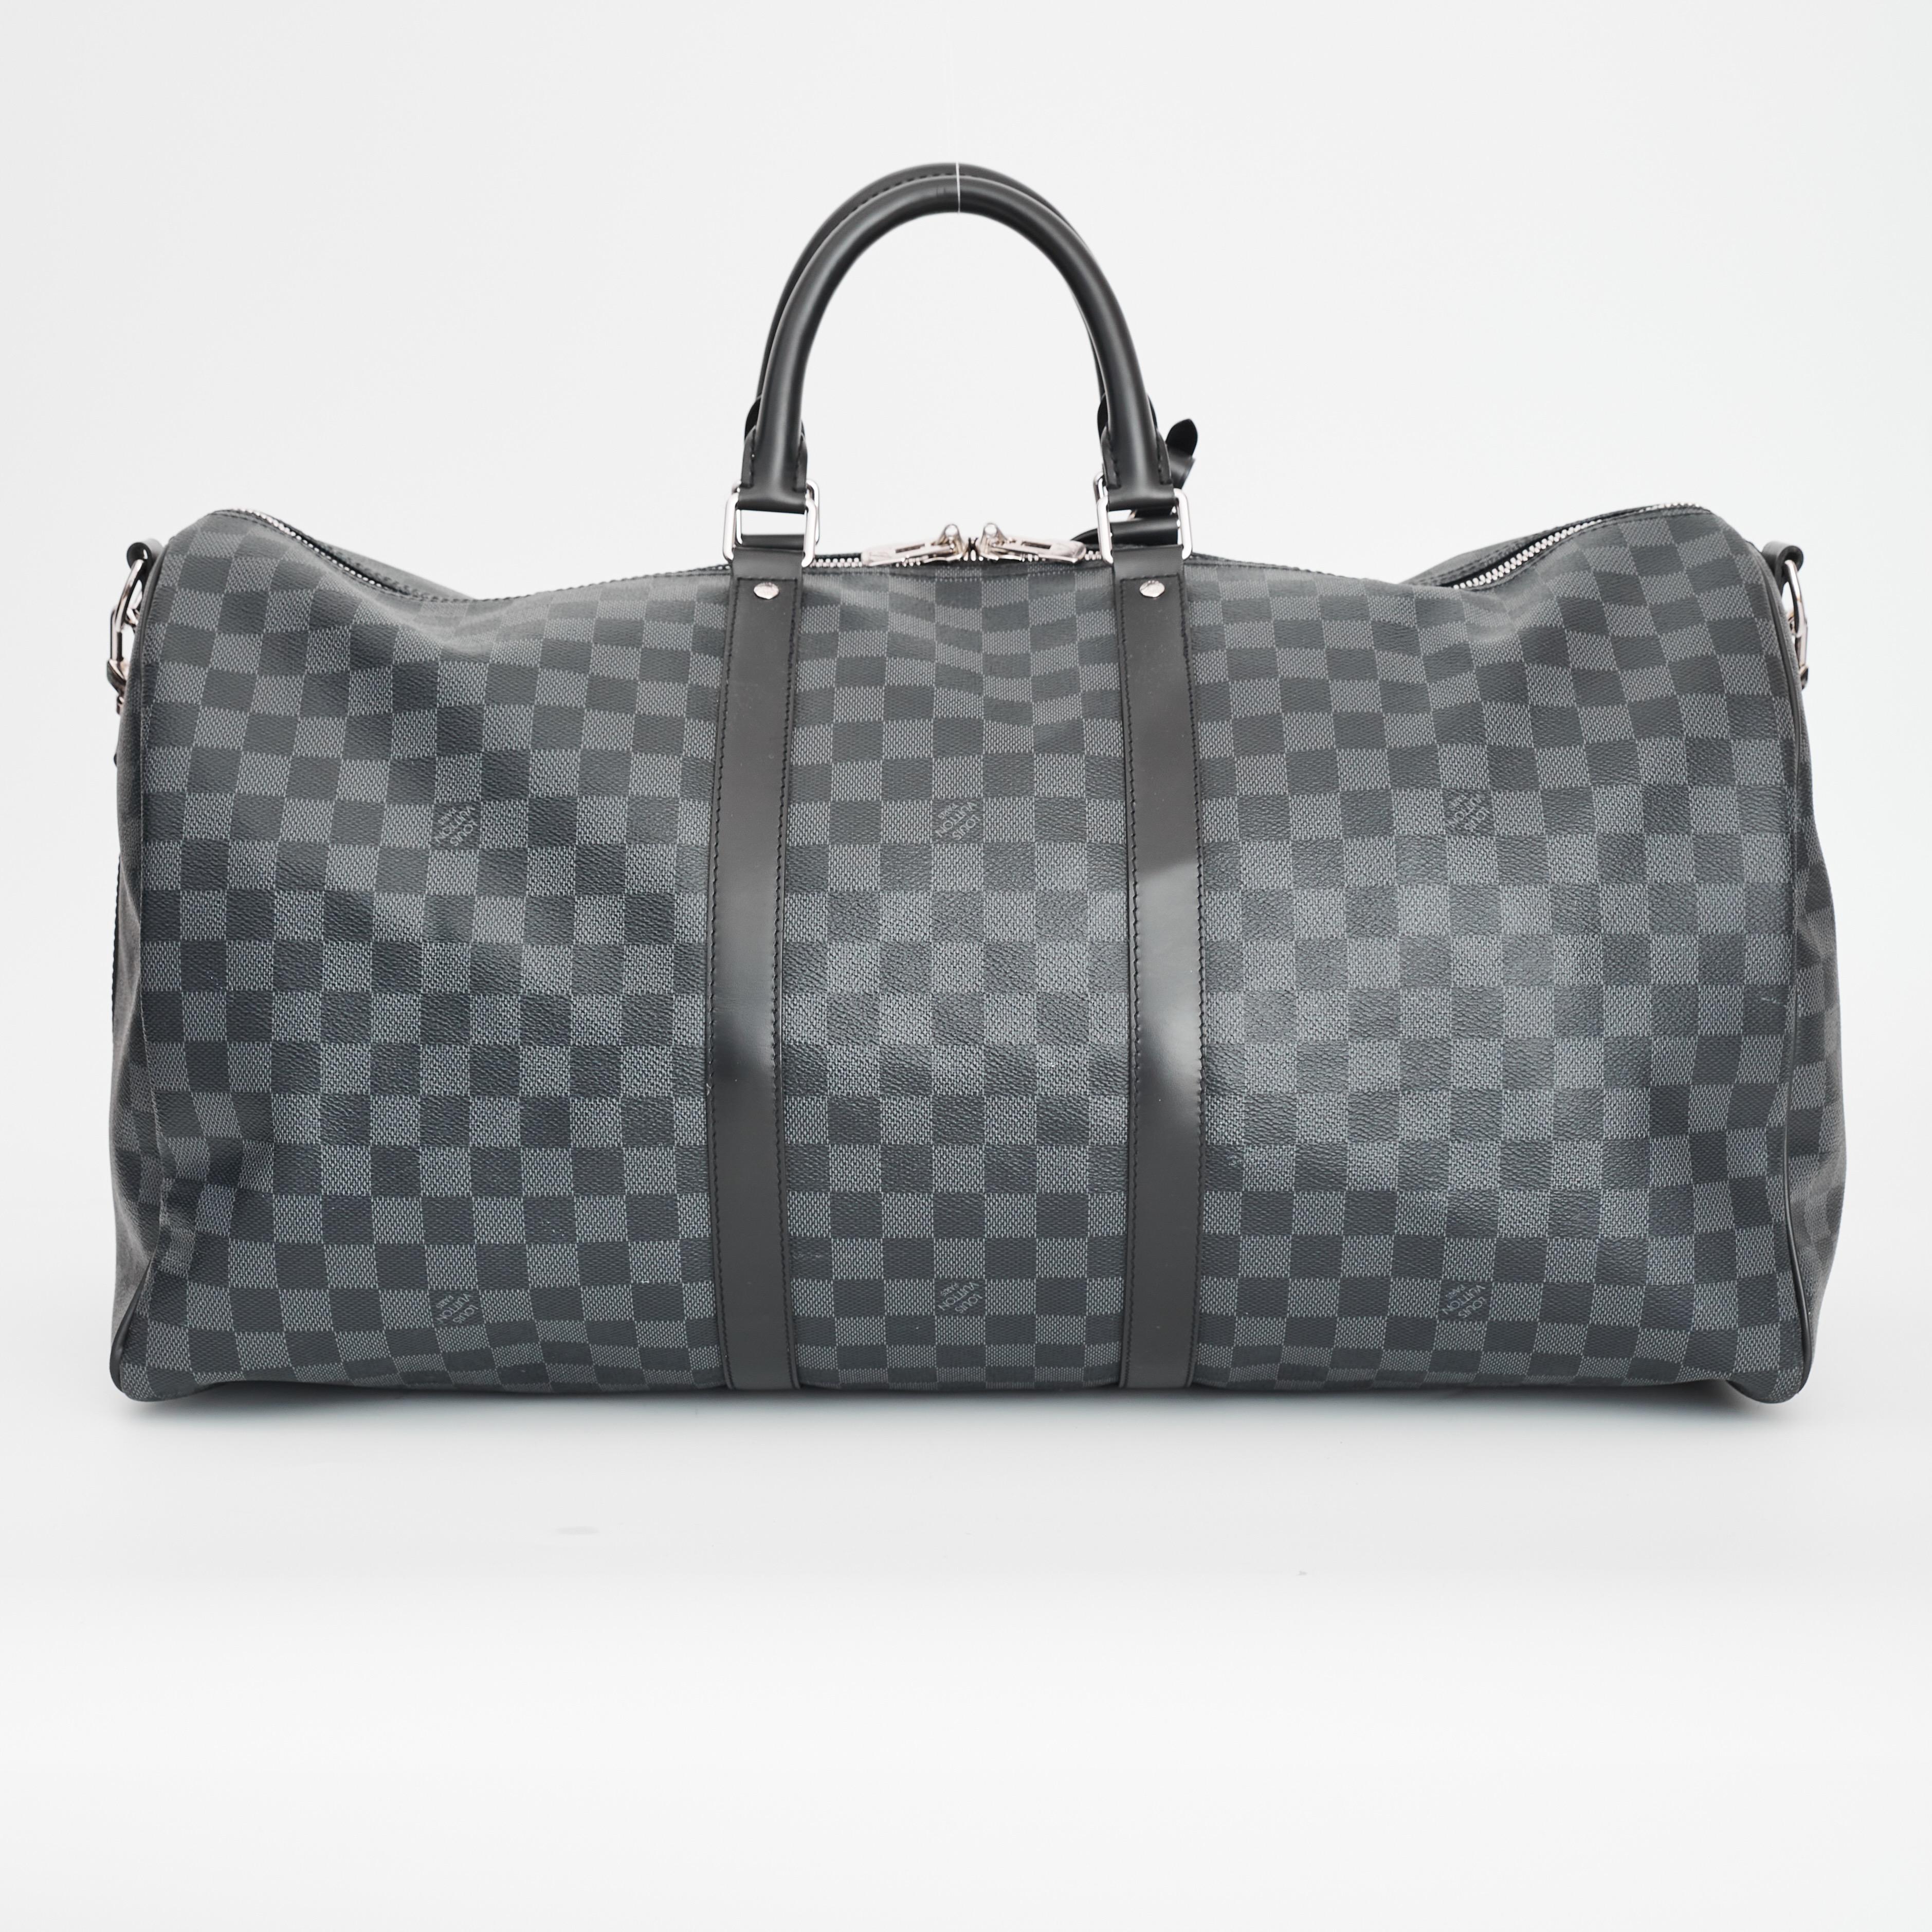 Louis Vuitton Weekender Bag. From the 2020 Collection. Made of black coated canvas and features damier graphite pattern, silver-tone hardware, leather details, rolled leather top handles, an adjustable shoulder strap, top zip closure, canvas lining